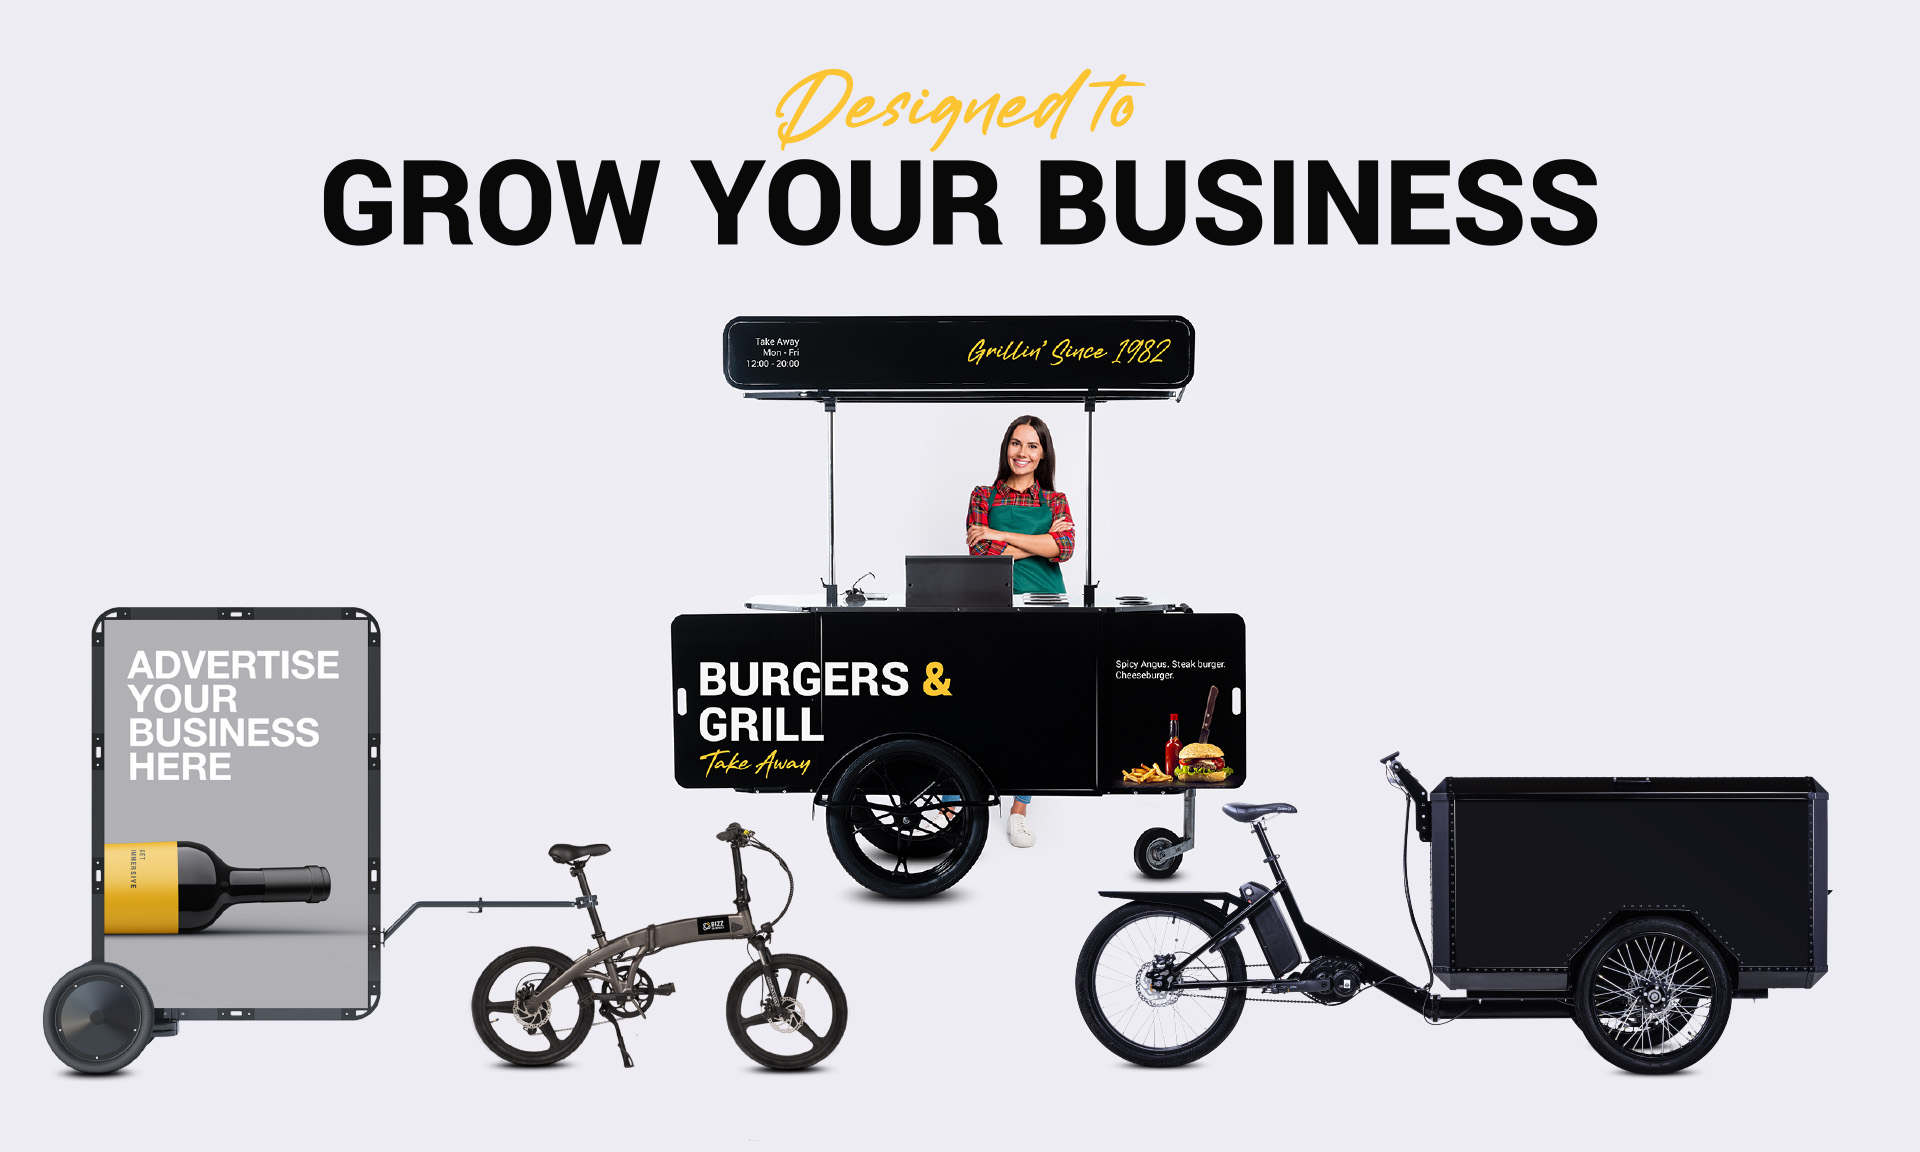 food carts, pop up carts, bike billboards and cargo bikes by Bizz On Wheels